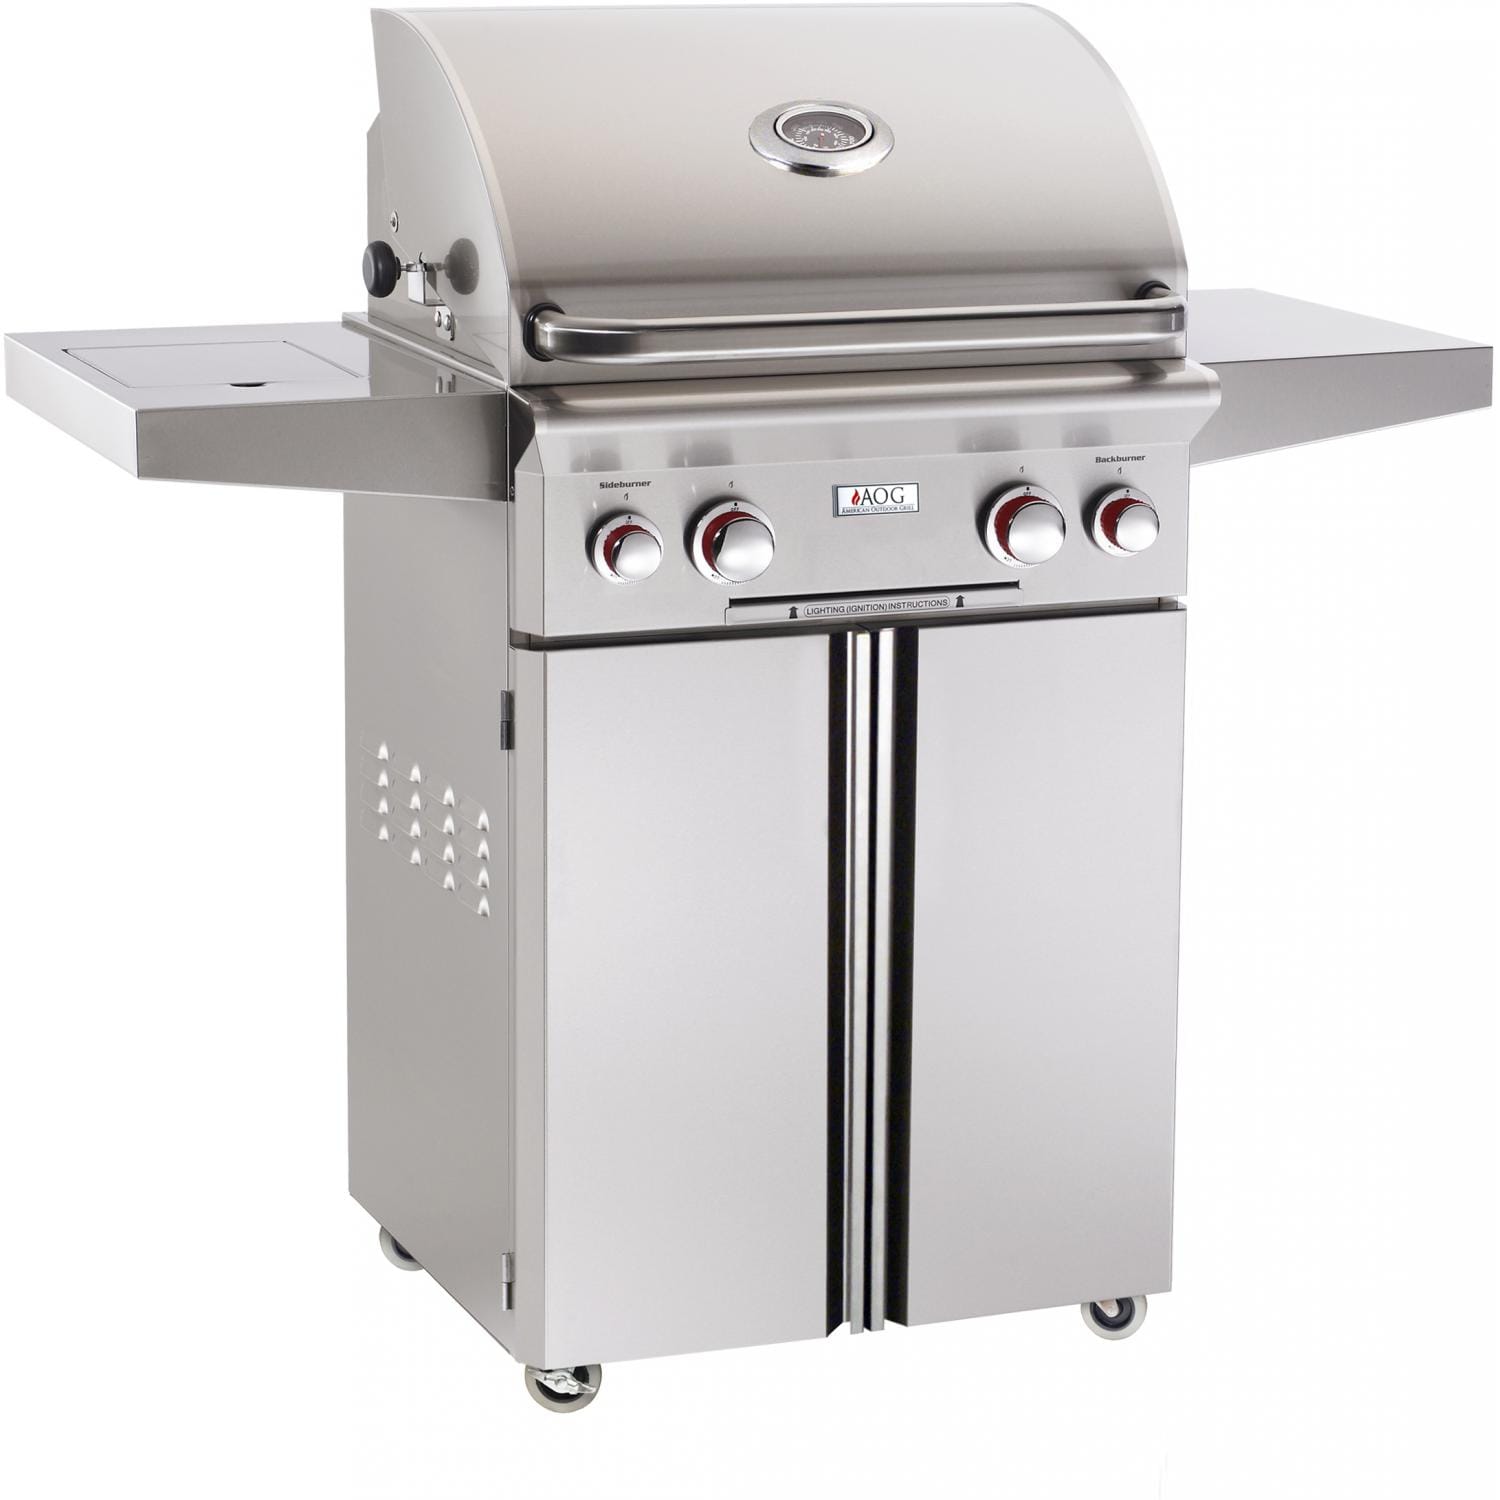 American Outdoor Grill 24PCT T-Series 24 Inch Propane Gas Grill On Cart With Side Burner And Rotisserie Kit - image 1 of 6